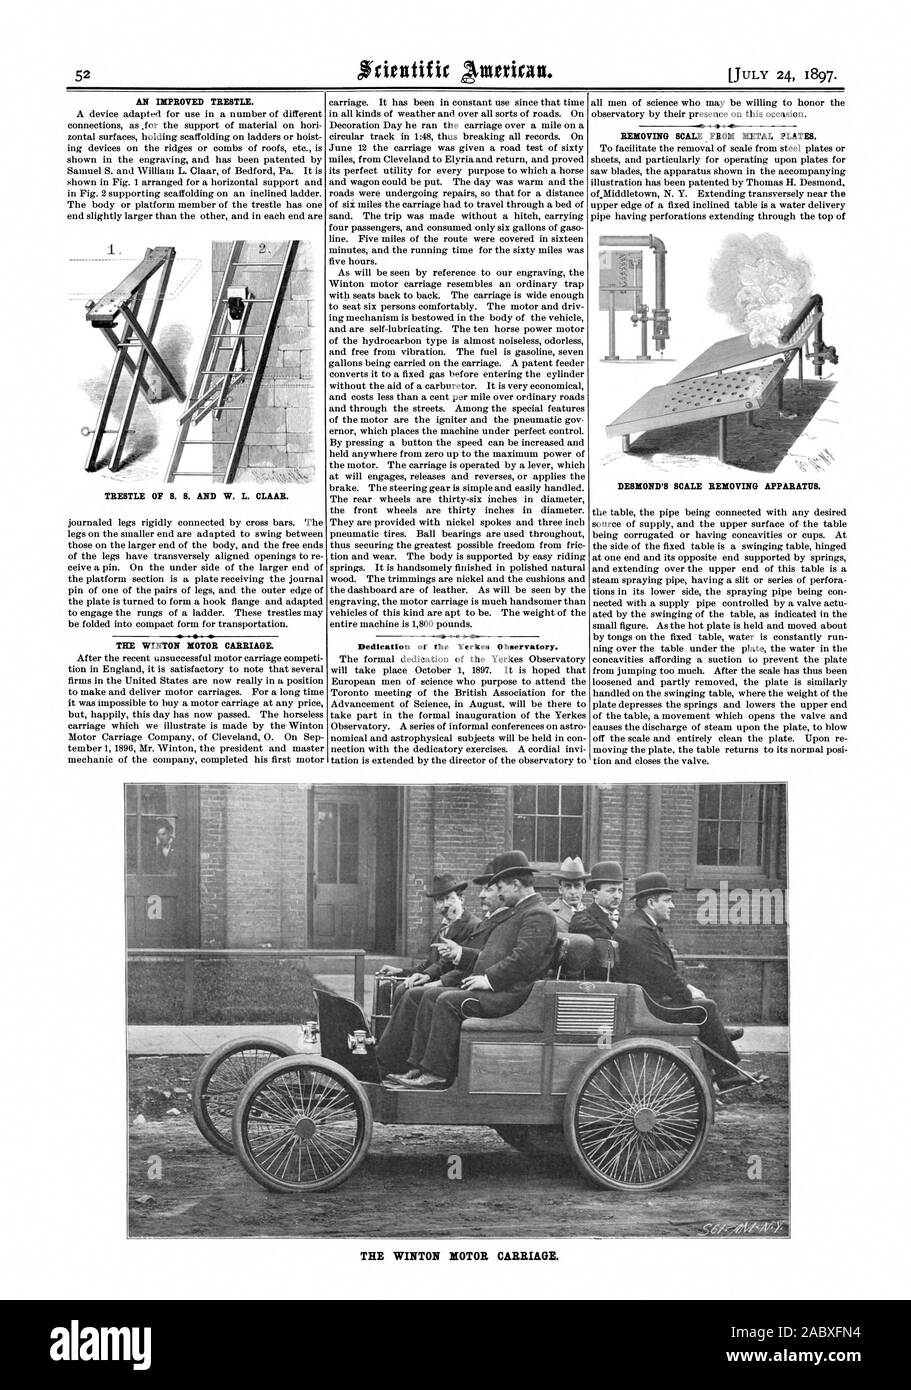 Dedication of the Yerkes Observatory. THE WINTON MOTOR CARRIAGE., scientific american, 1897-07-24 Stock Photo